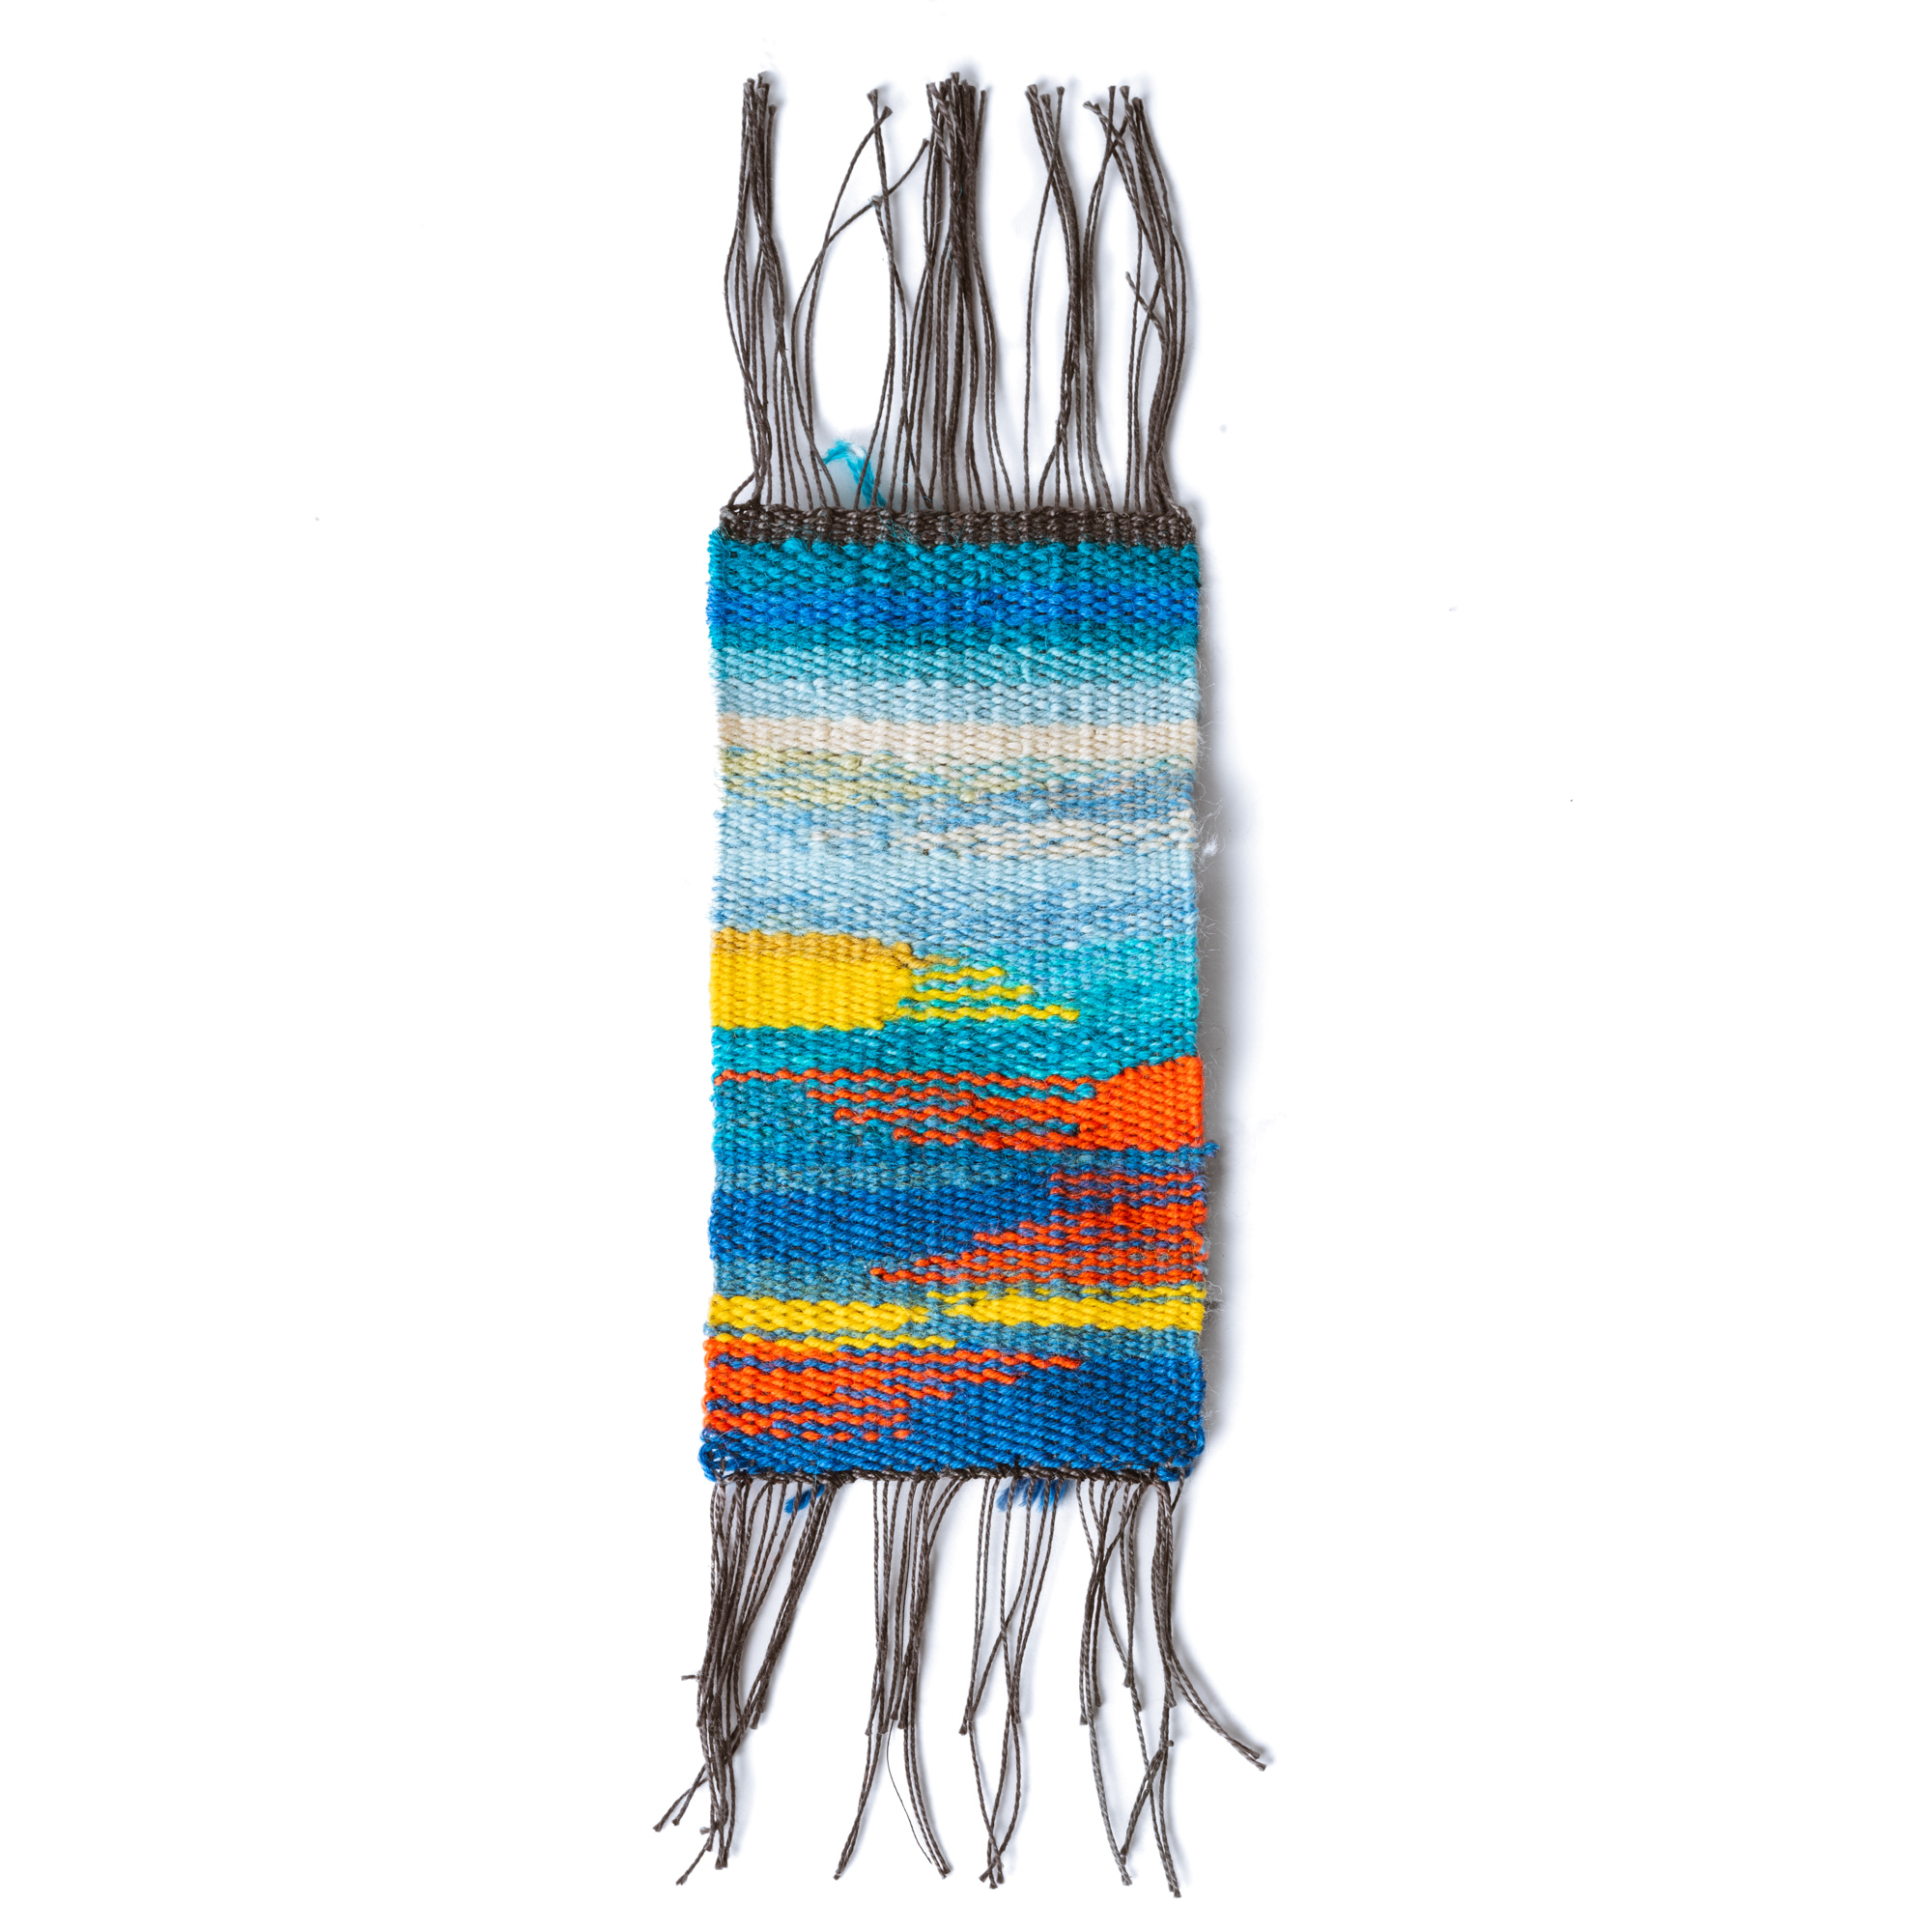 Weaving: Introduction to Tapestry Weaving